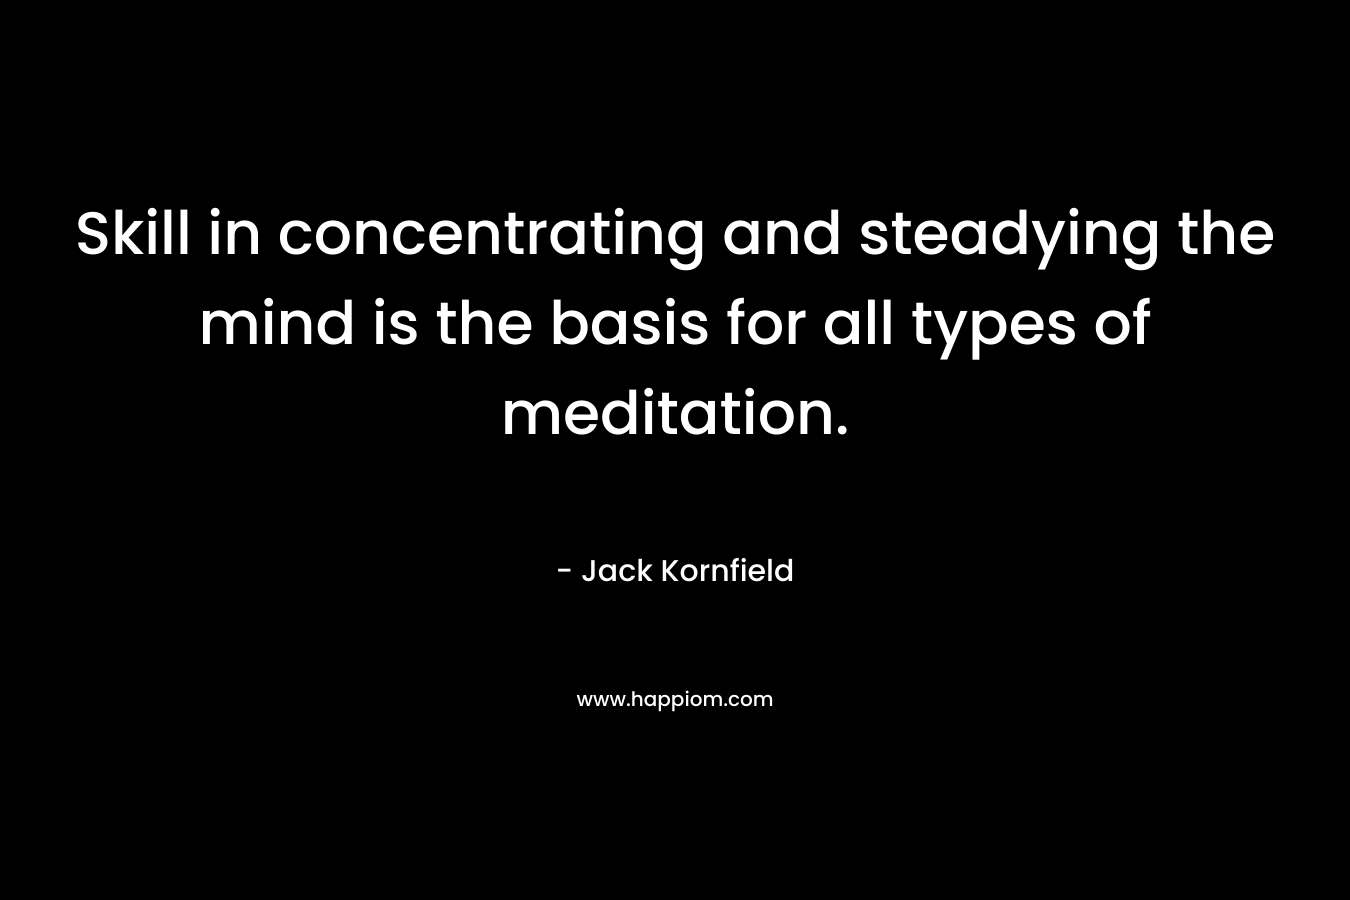 Skill in concentrating and steadying the mind is the basis for all types of meditation. – Jack Kornfield